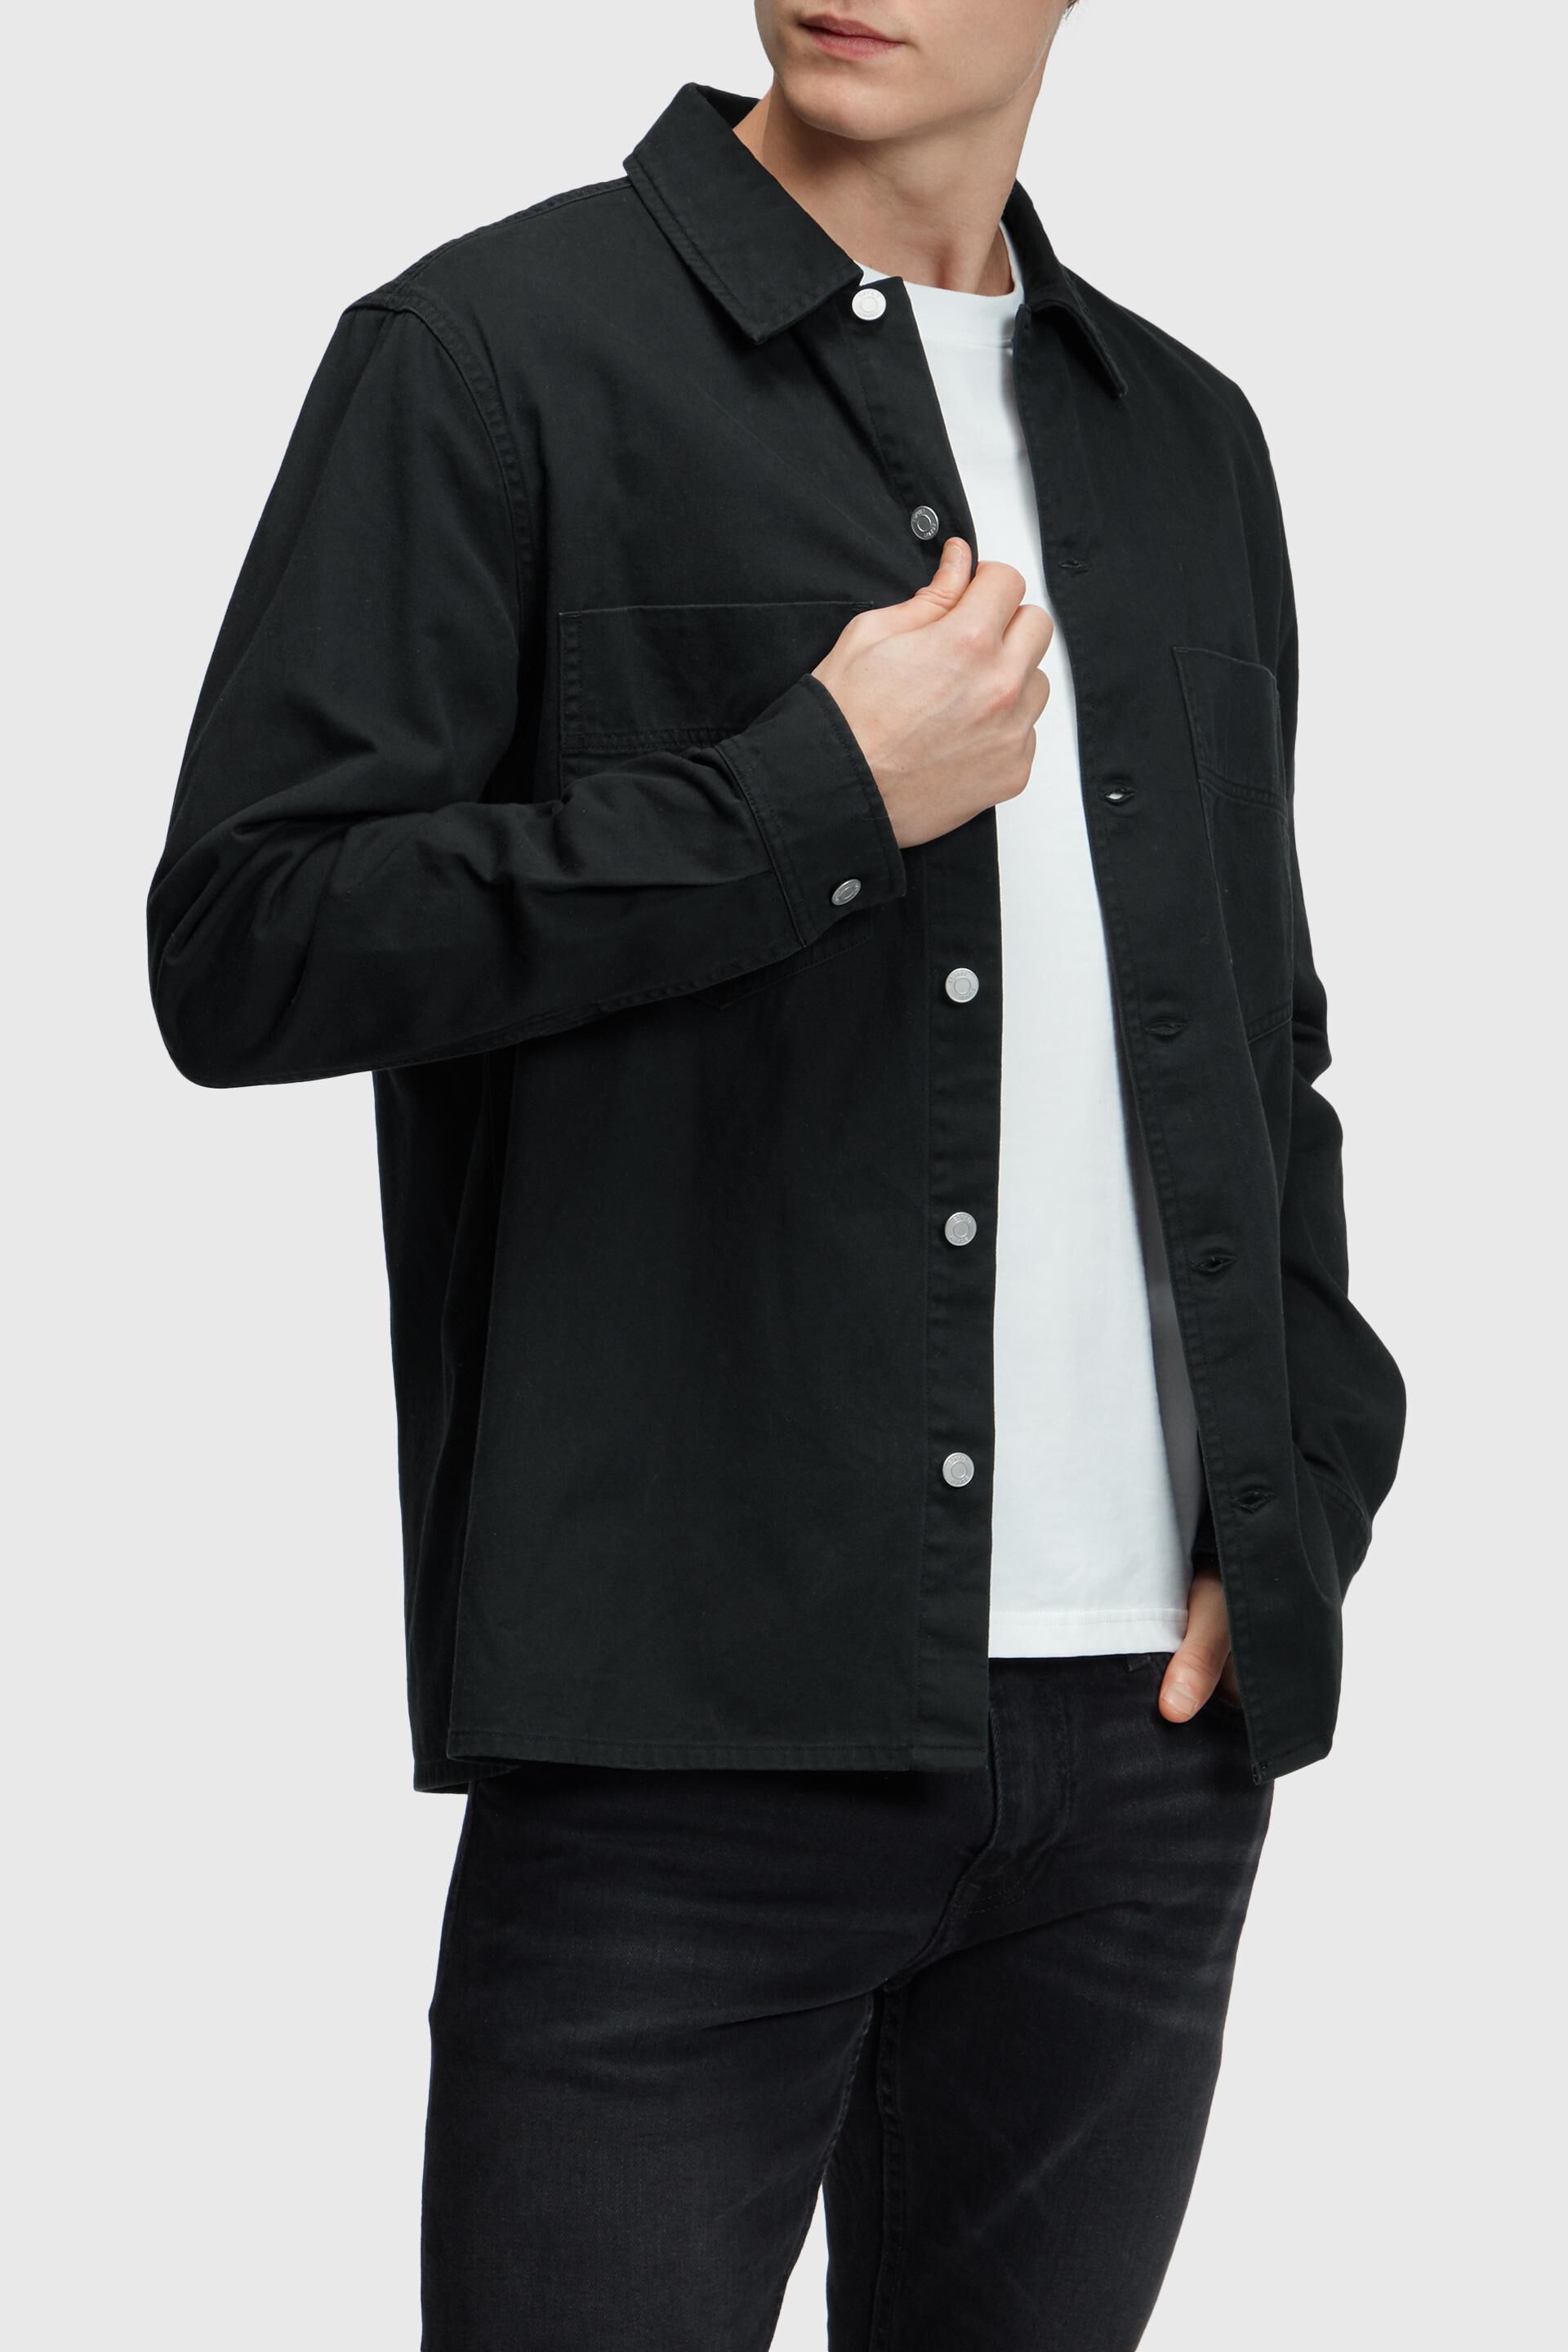 Esprit heavy Relaxed shirt fit